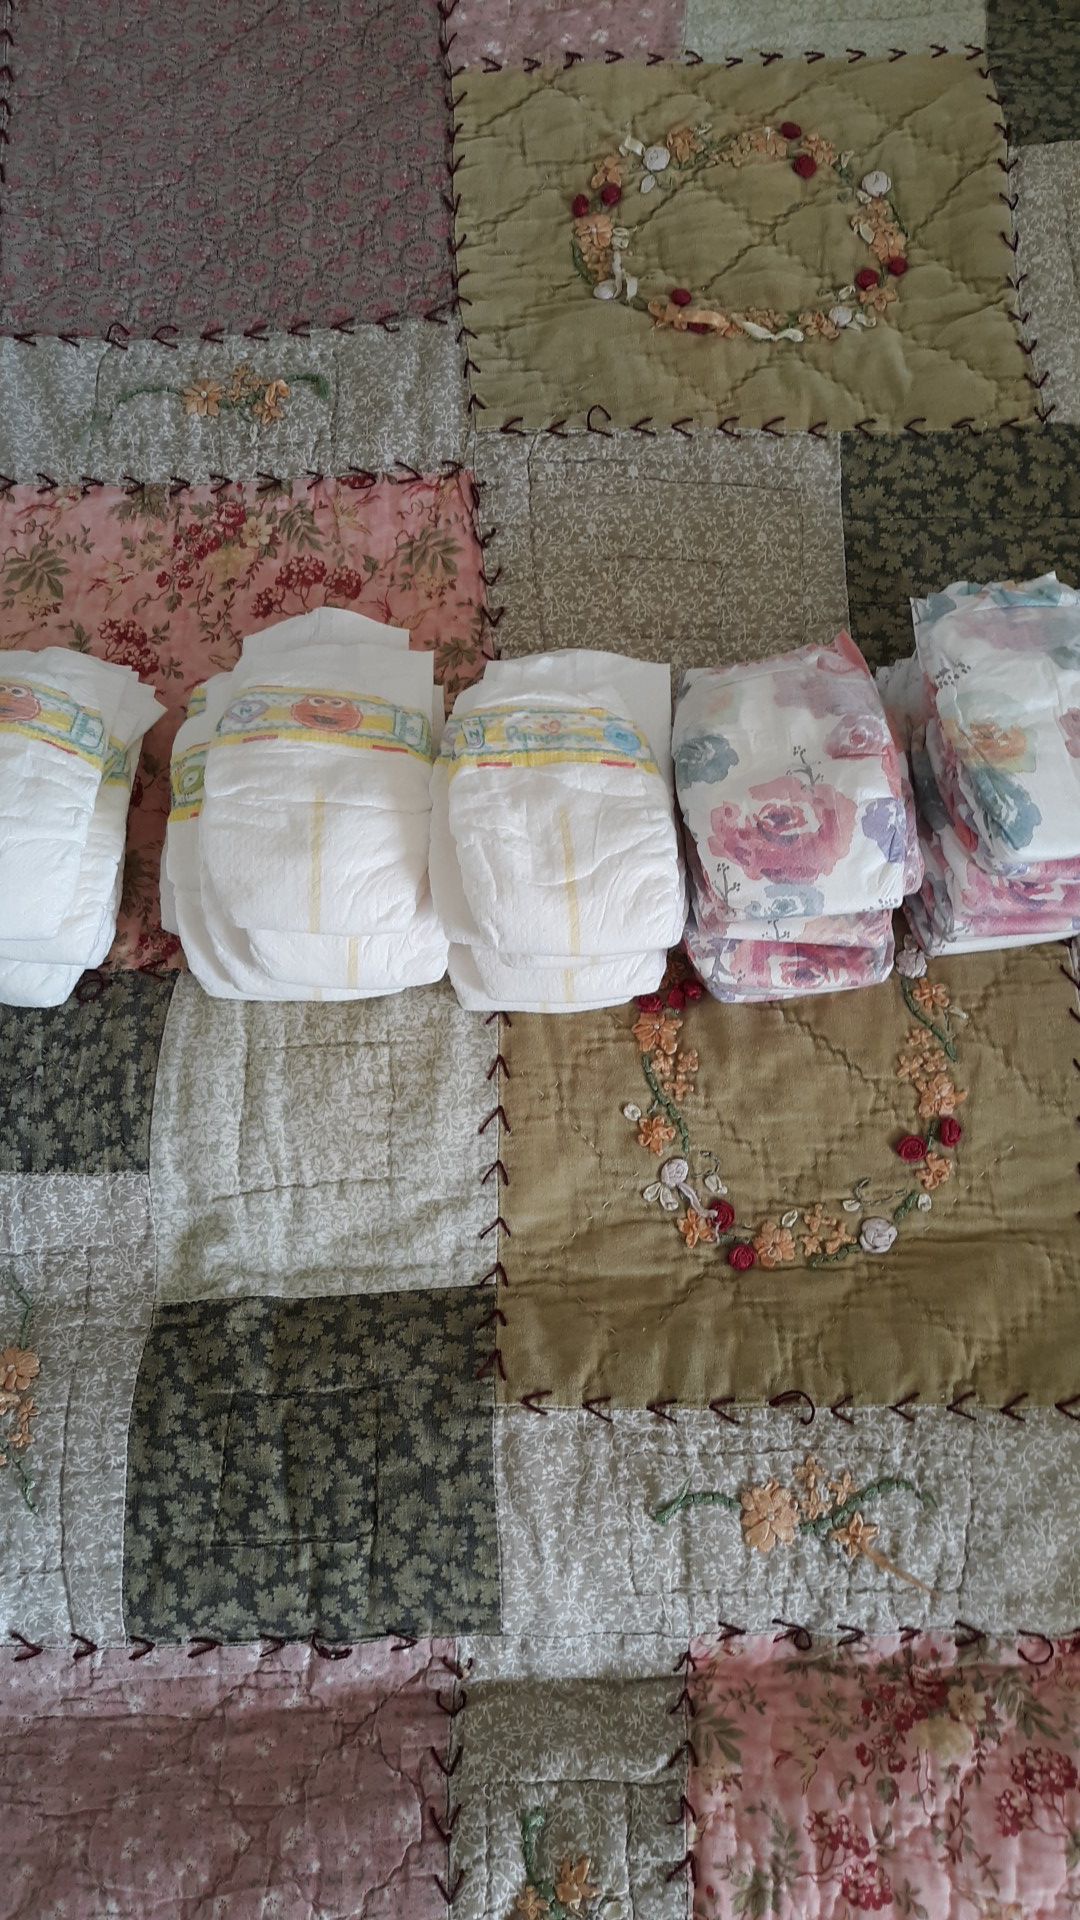 30 Newborn Pampers and Honest Diapers